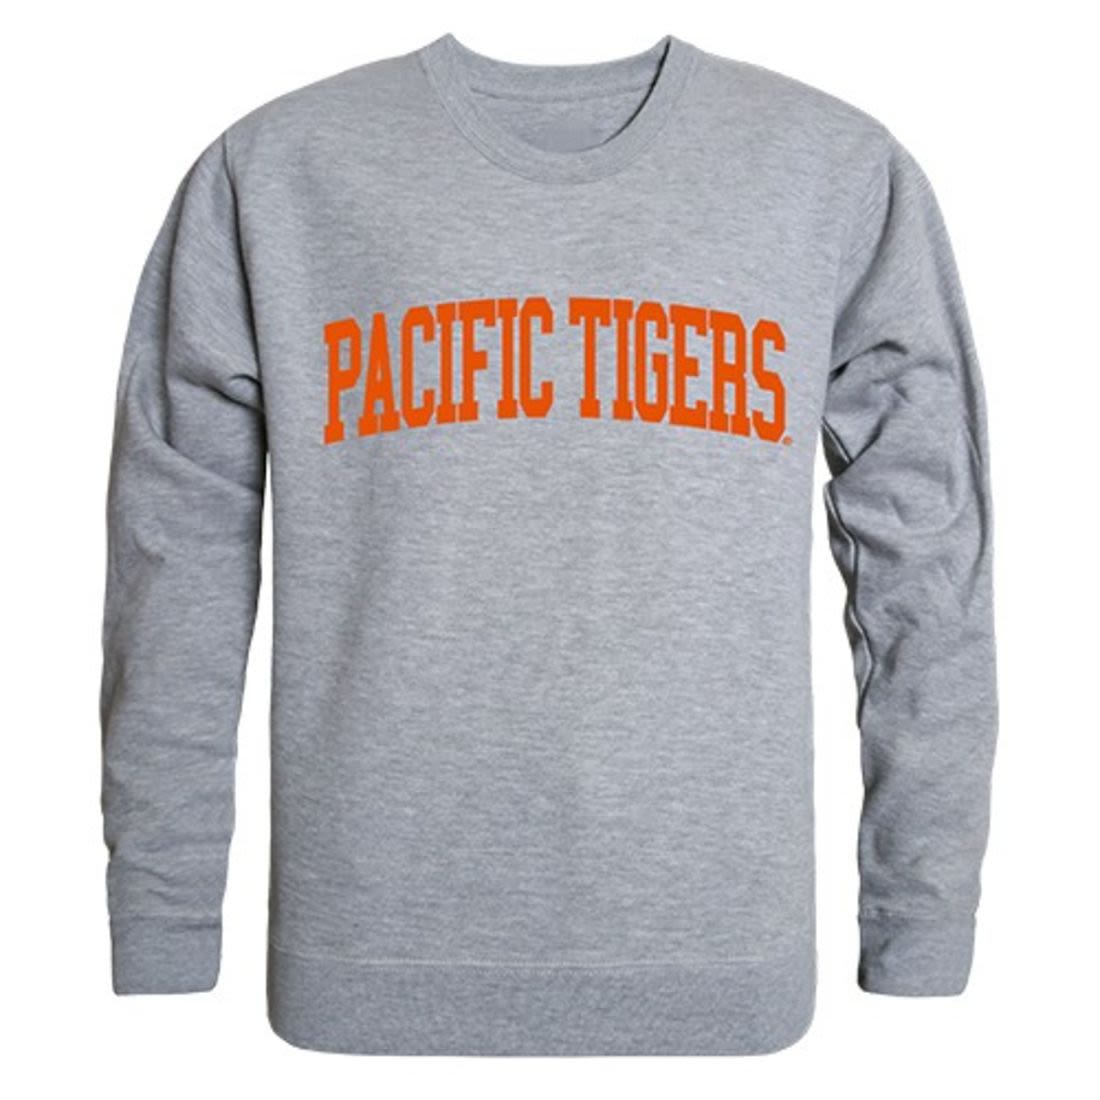 University of the Pacific Game Day Crewneck Pullover Sweatshirt Sweater Heather Grey-Campus-Wardrobe